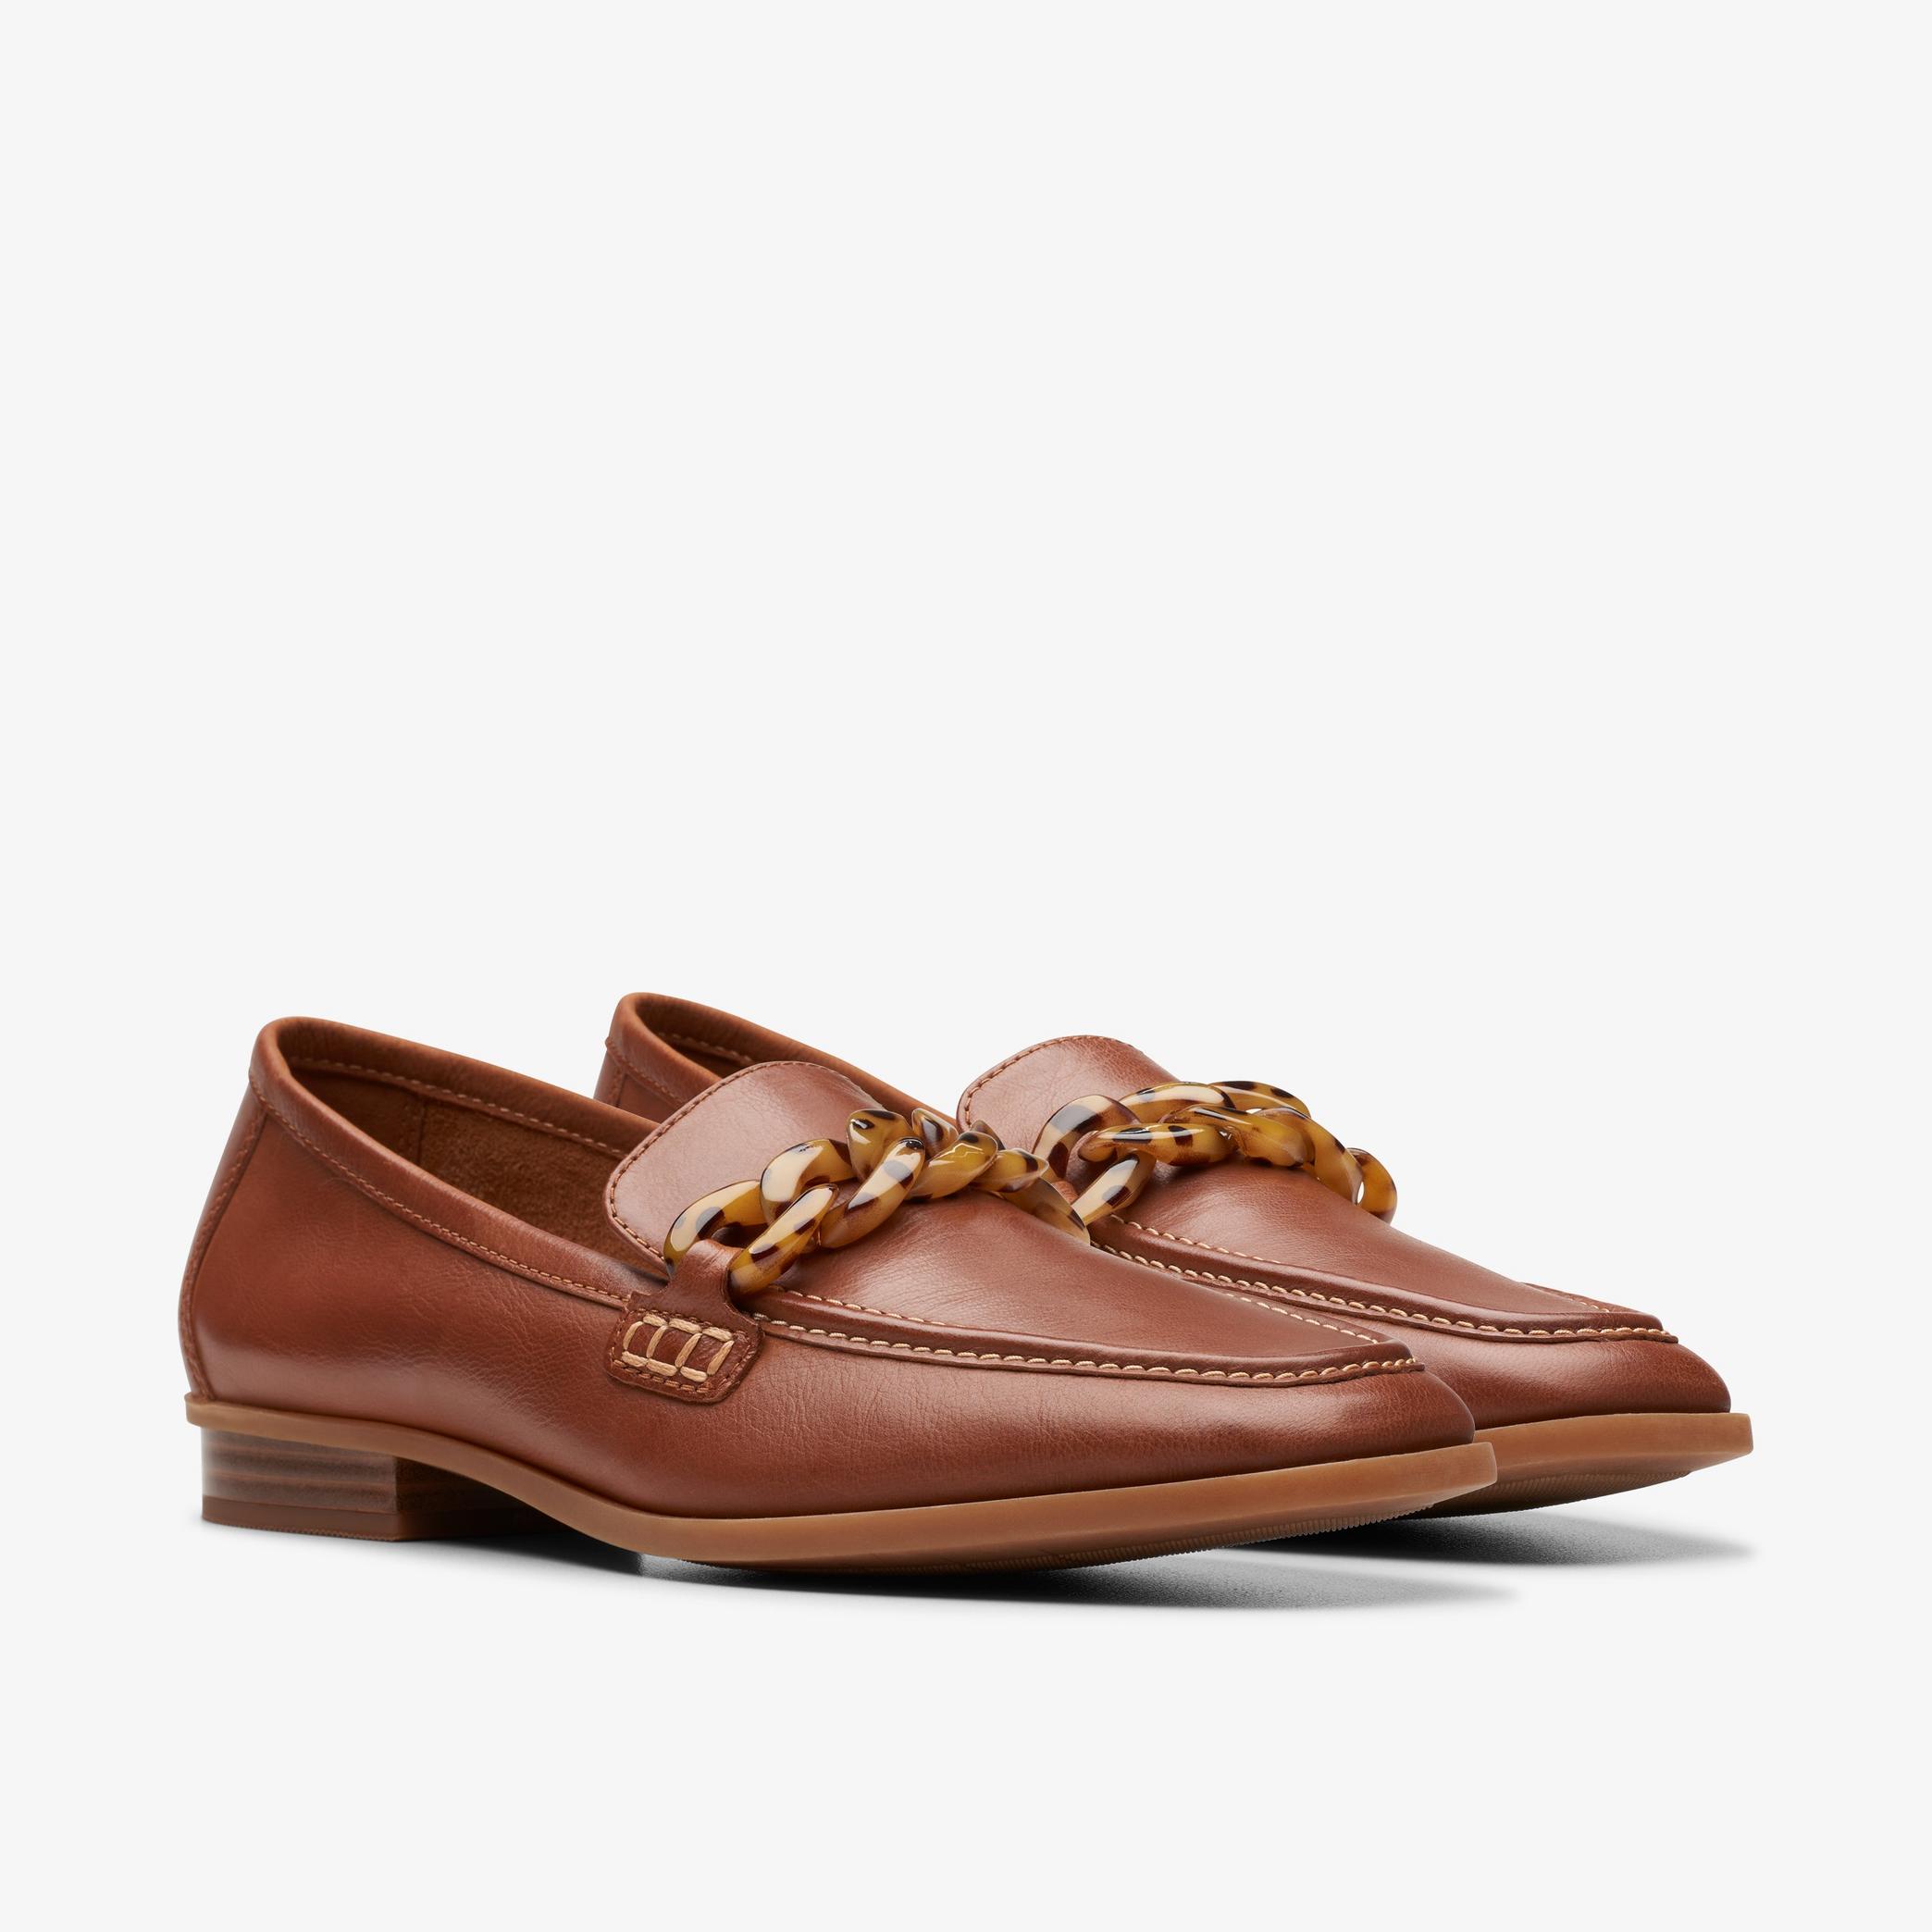 Sarafyna Iris Tan Leather Loafers, view 5 of 11